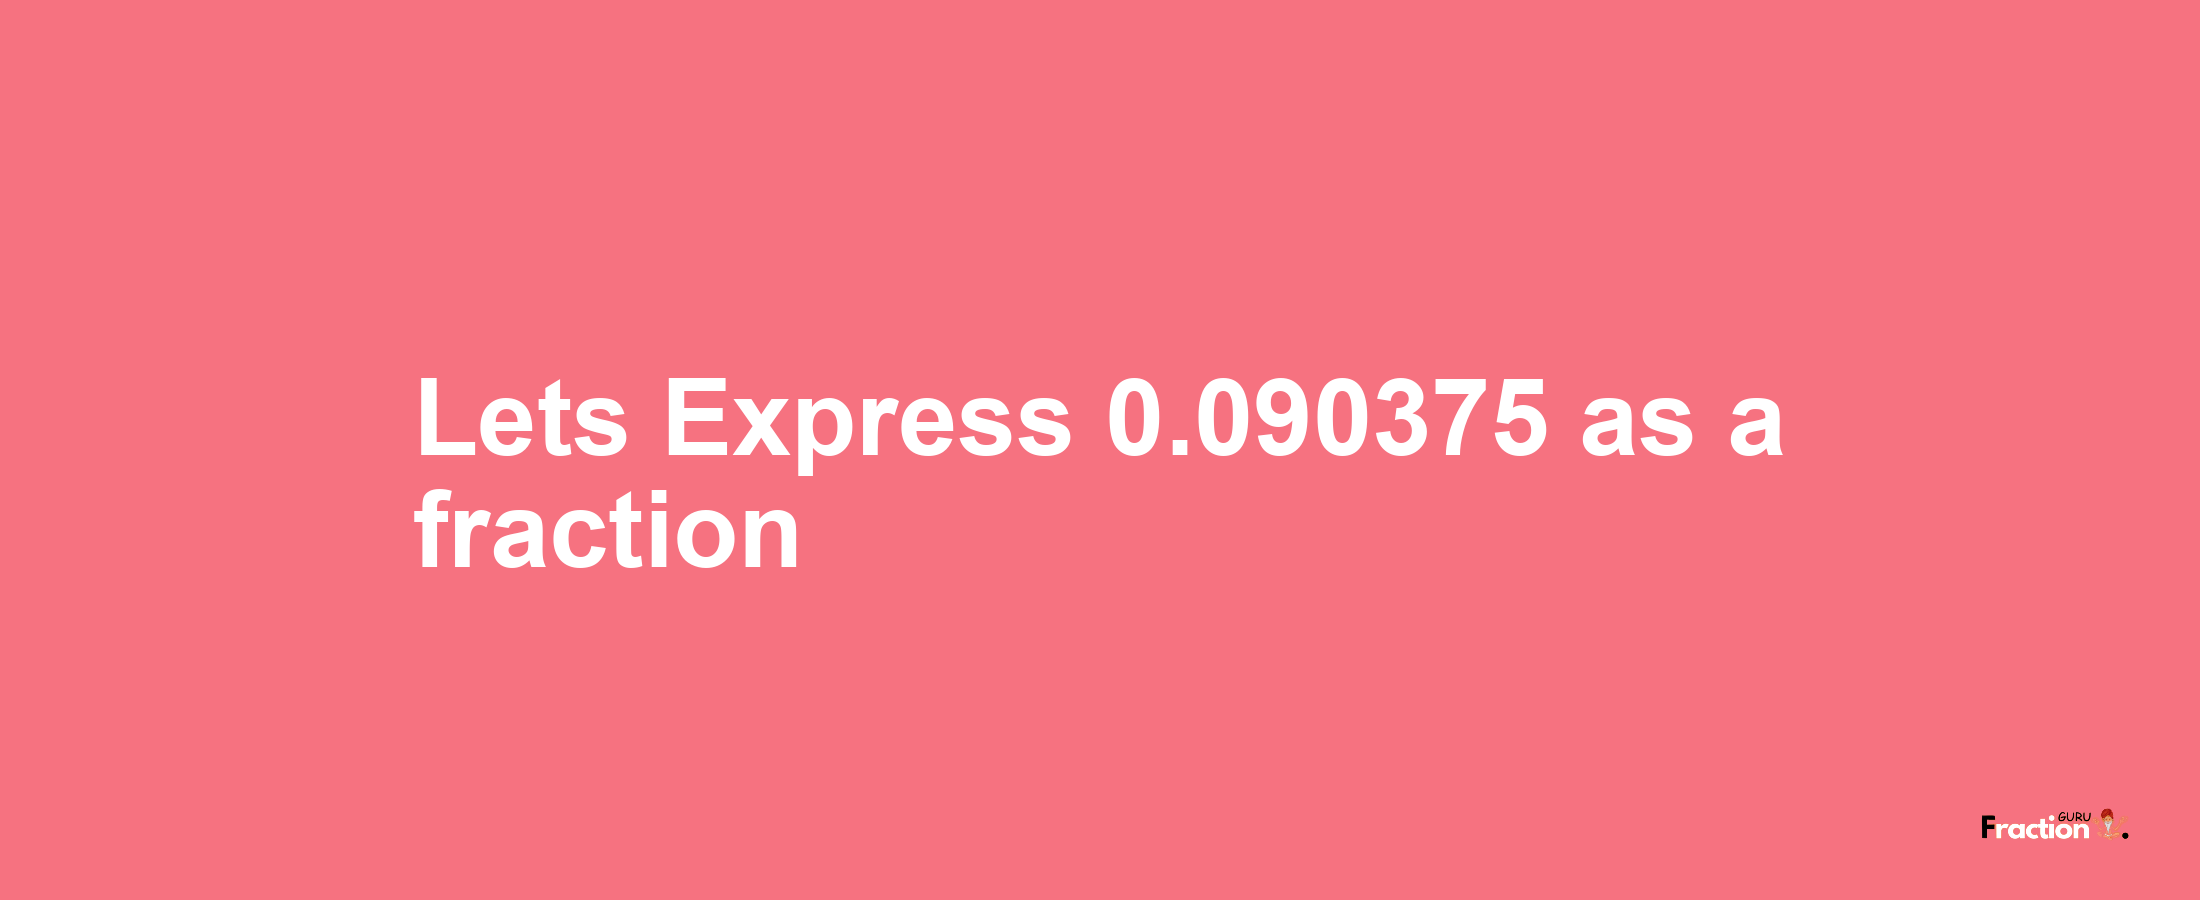 Lets Express 0.090375 as afraction